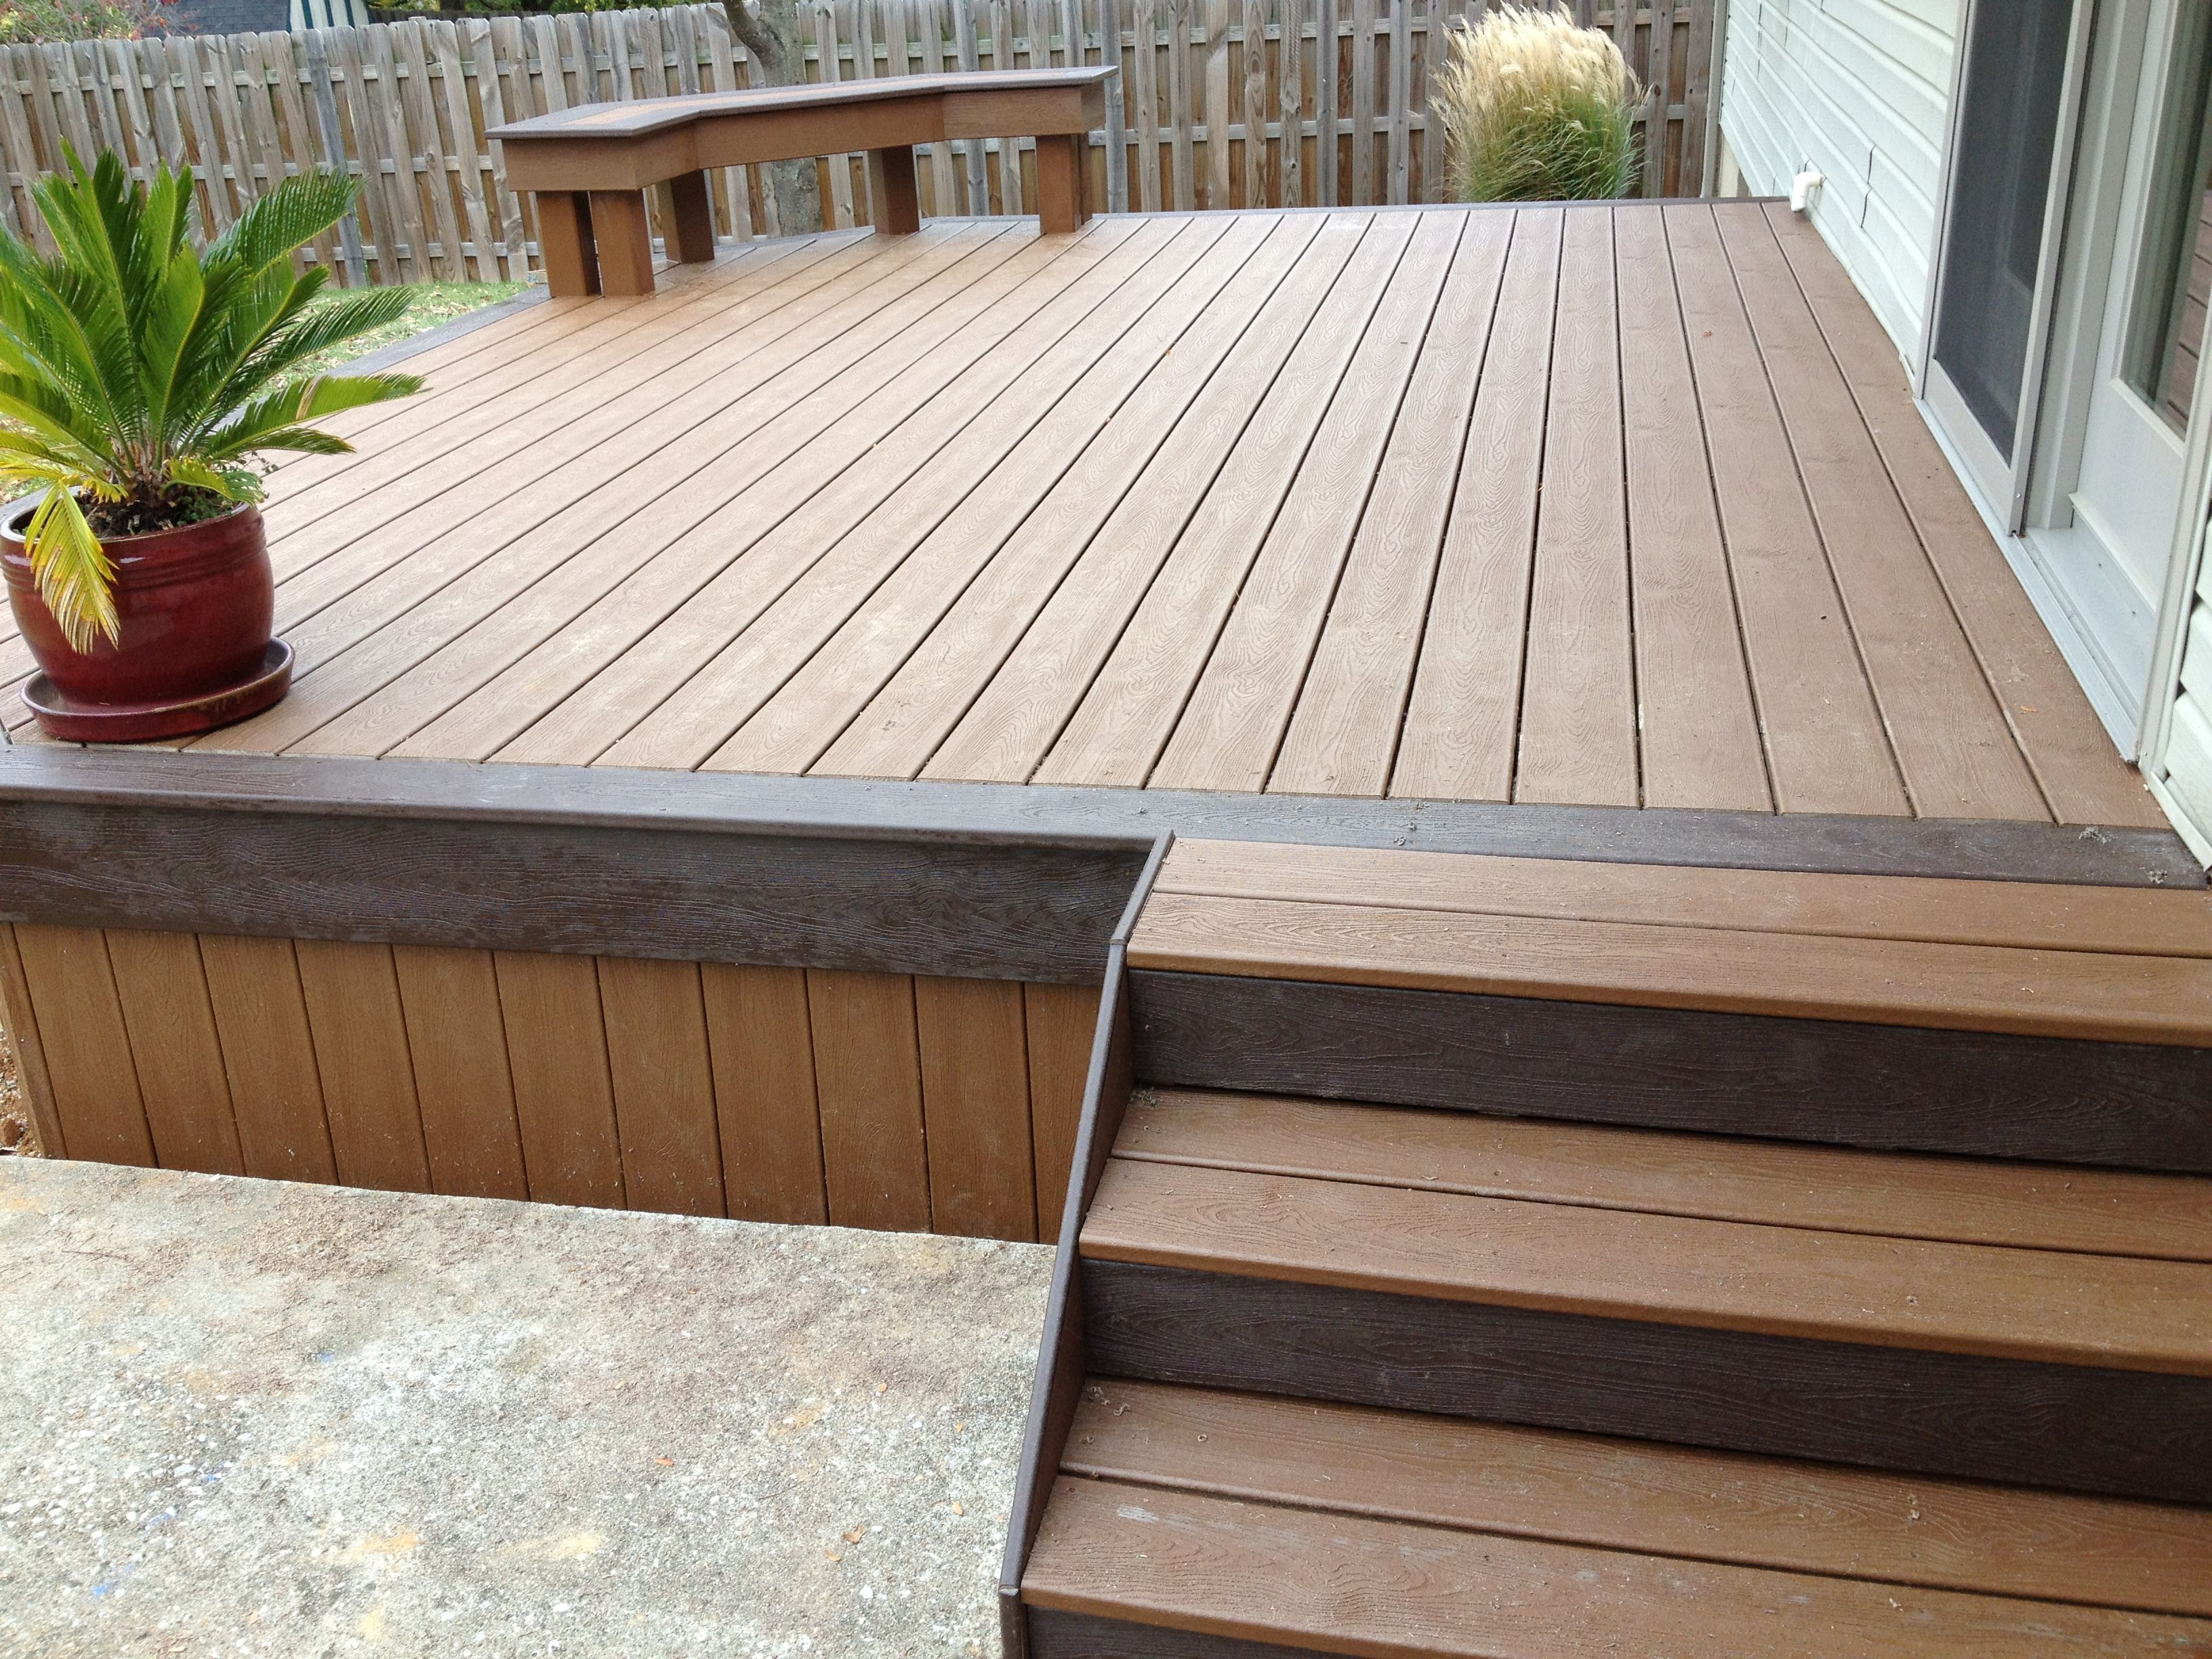 Trex Transcends Decking With A Transferable 25 Year Waranty And intended for proportions 3264 X 2448